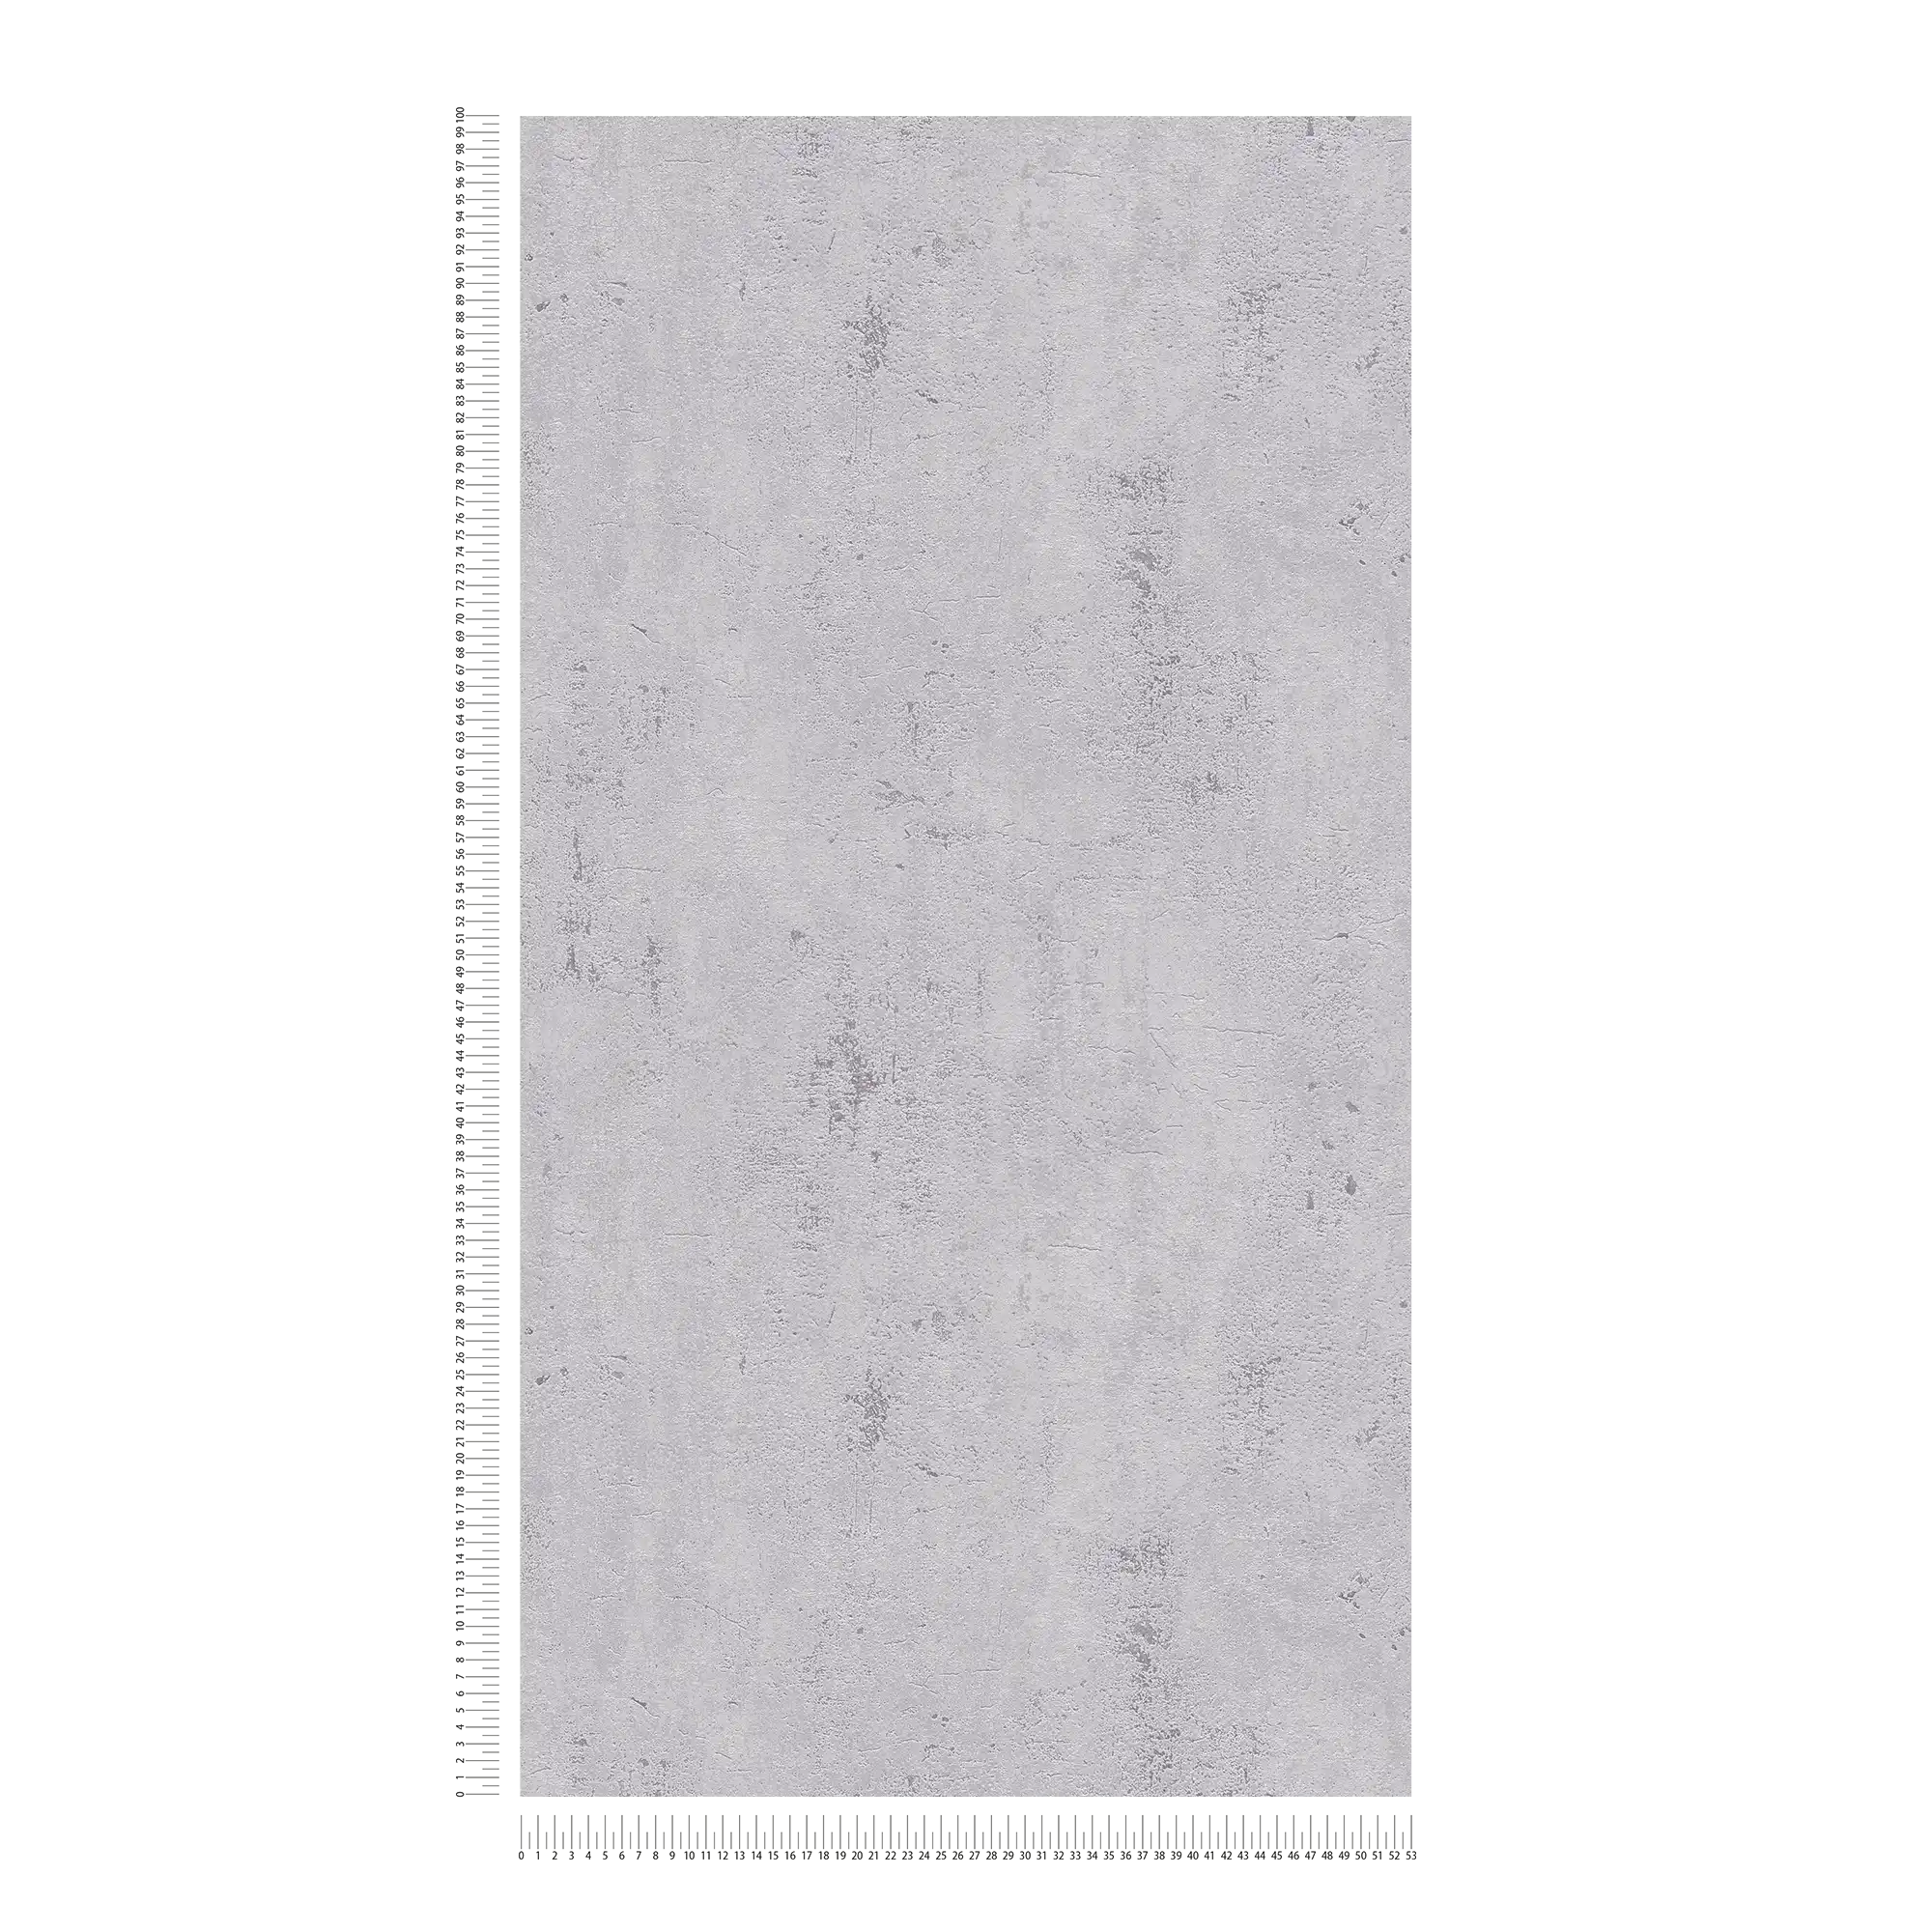             Non-woven wallpaper with plaster look in rustic style - grey
        